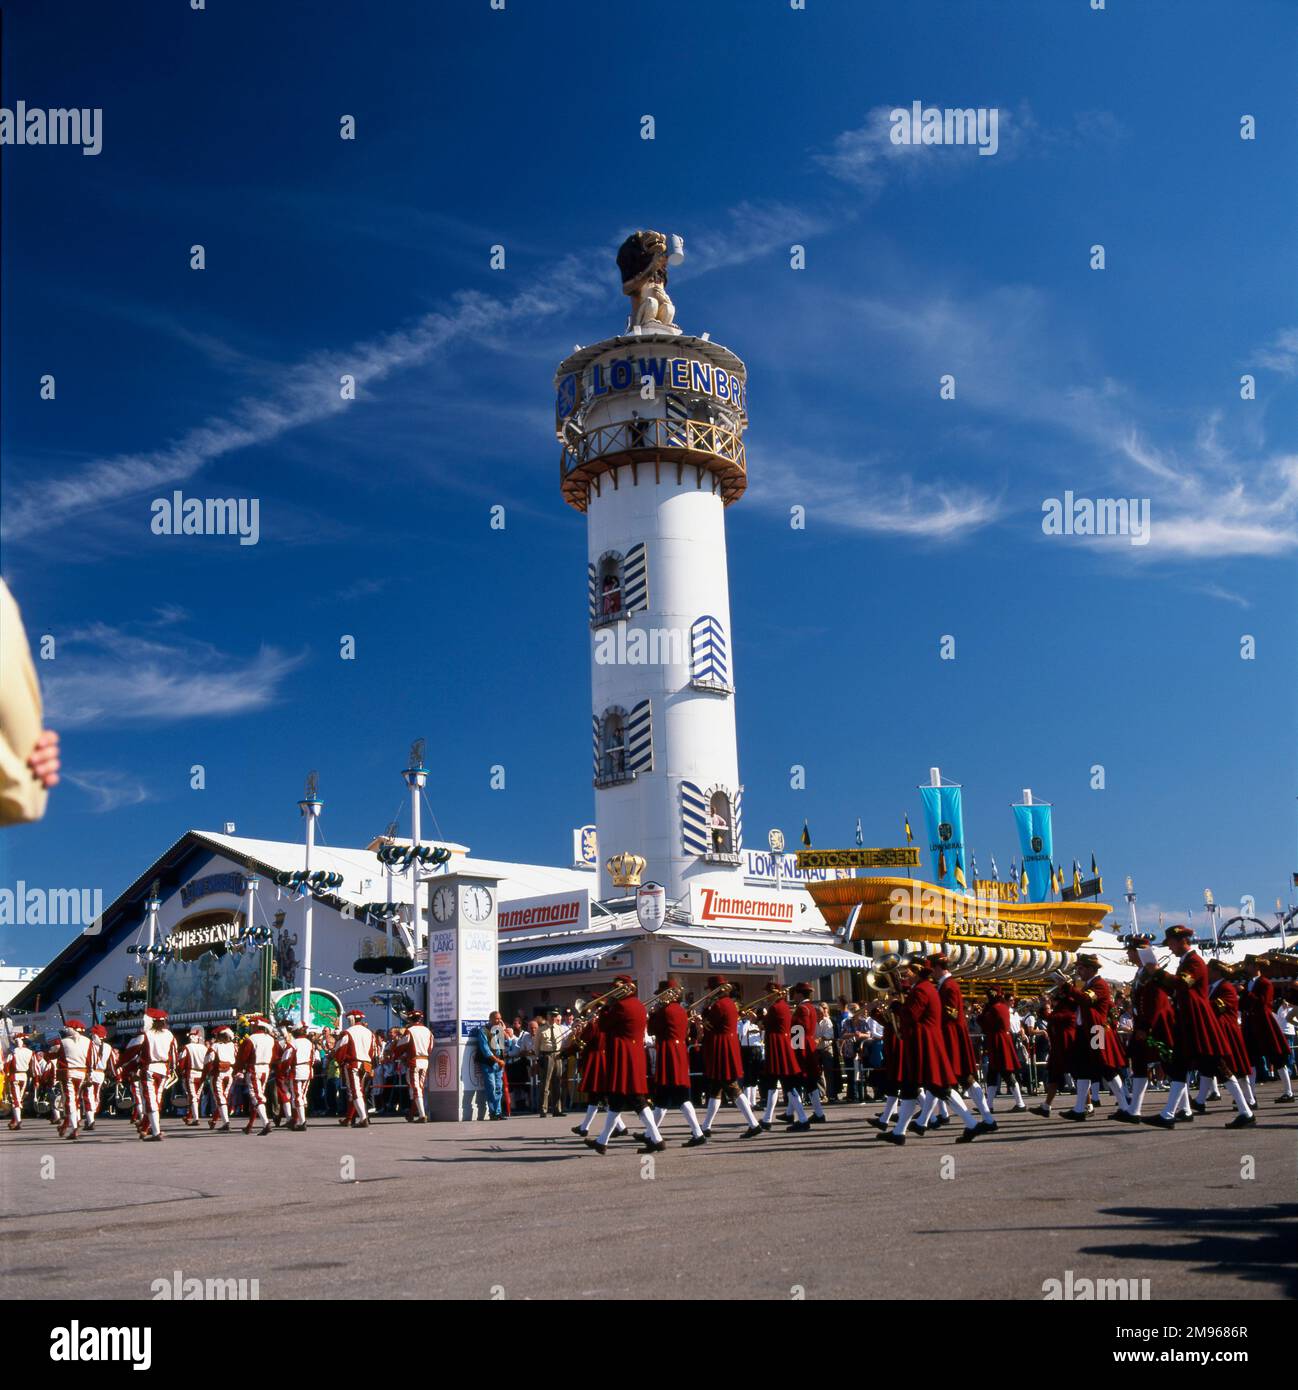 Scene at the Oktoberfest in Munich, Germany, with a marching band in folk costumes making their way past the tower of the Lowenbrau Brewery. Stock Photo